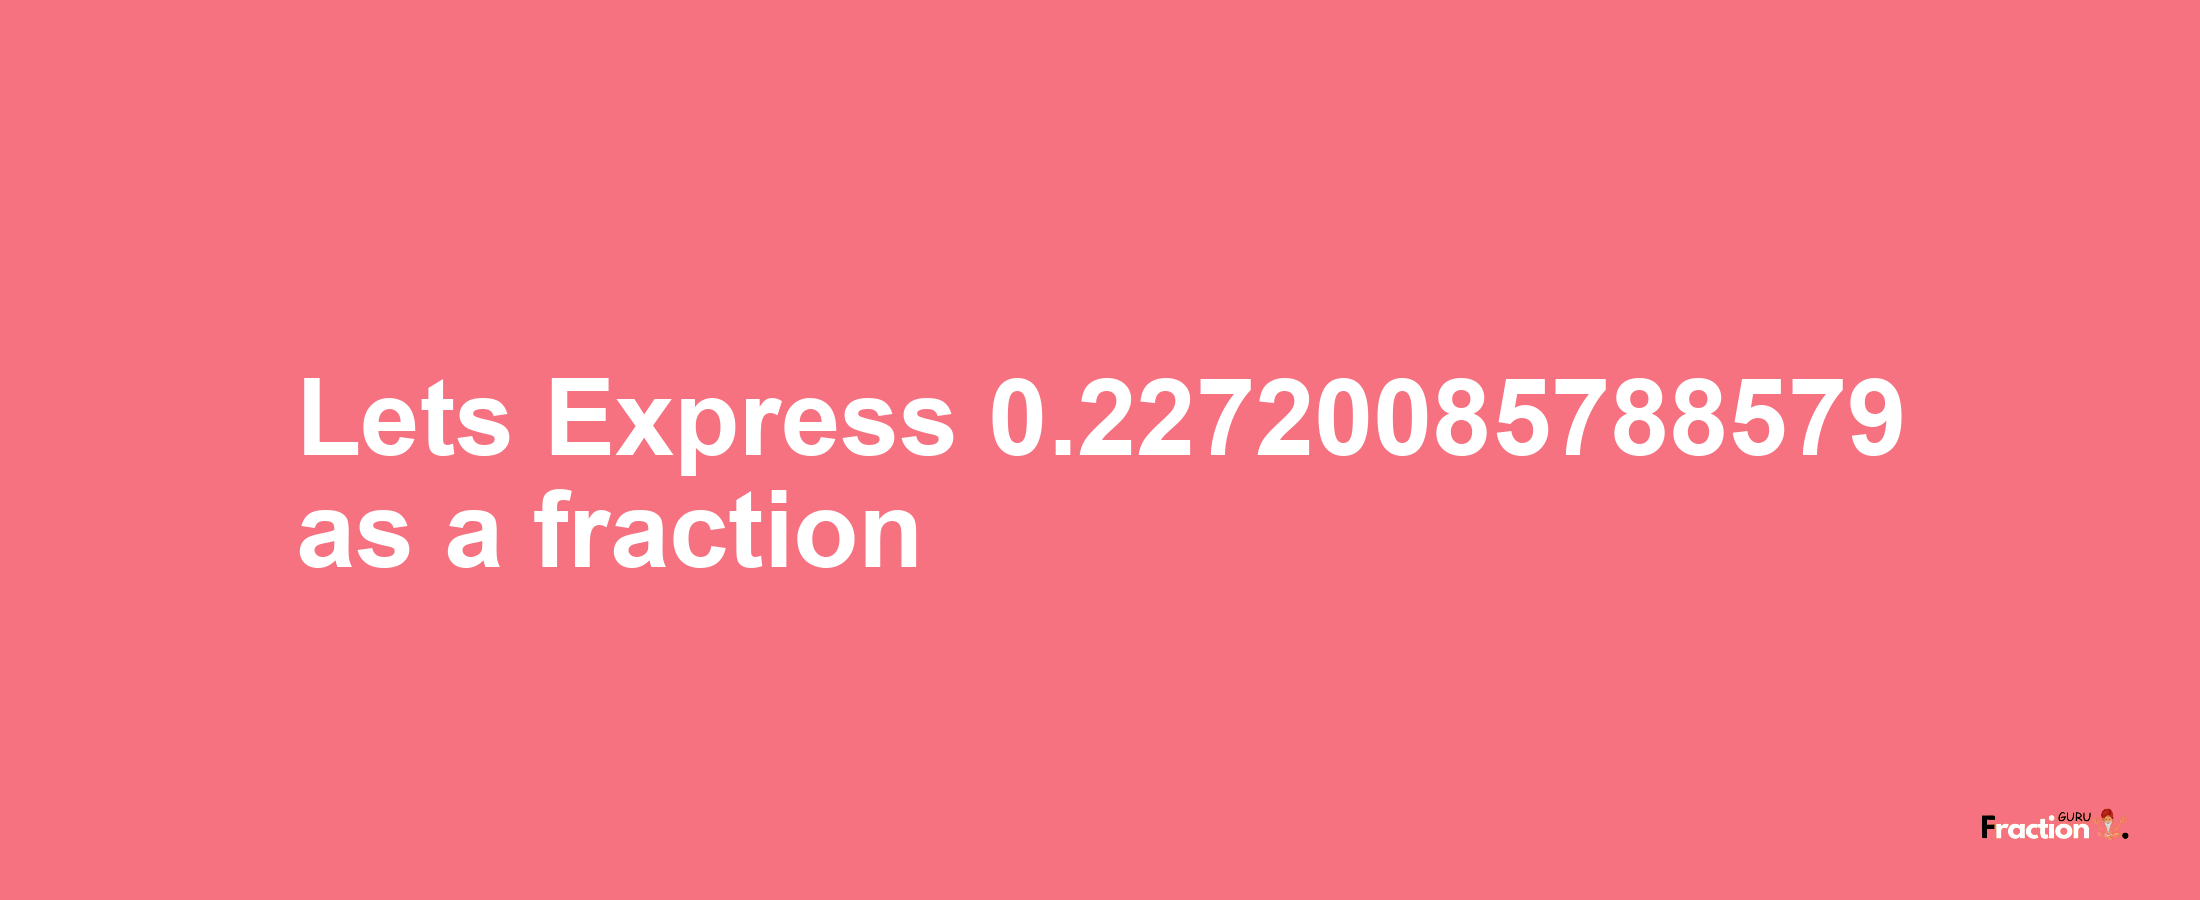 Lets Express 0.22720085788579 as afraction